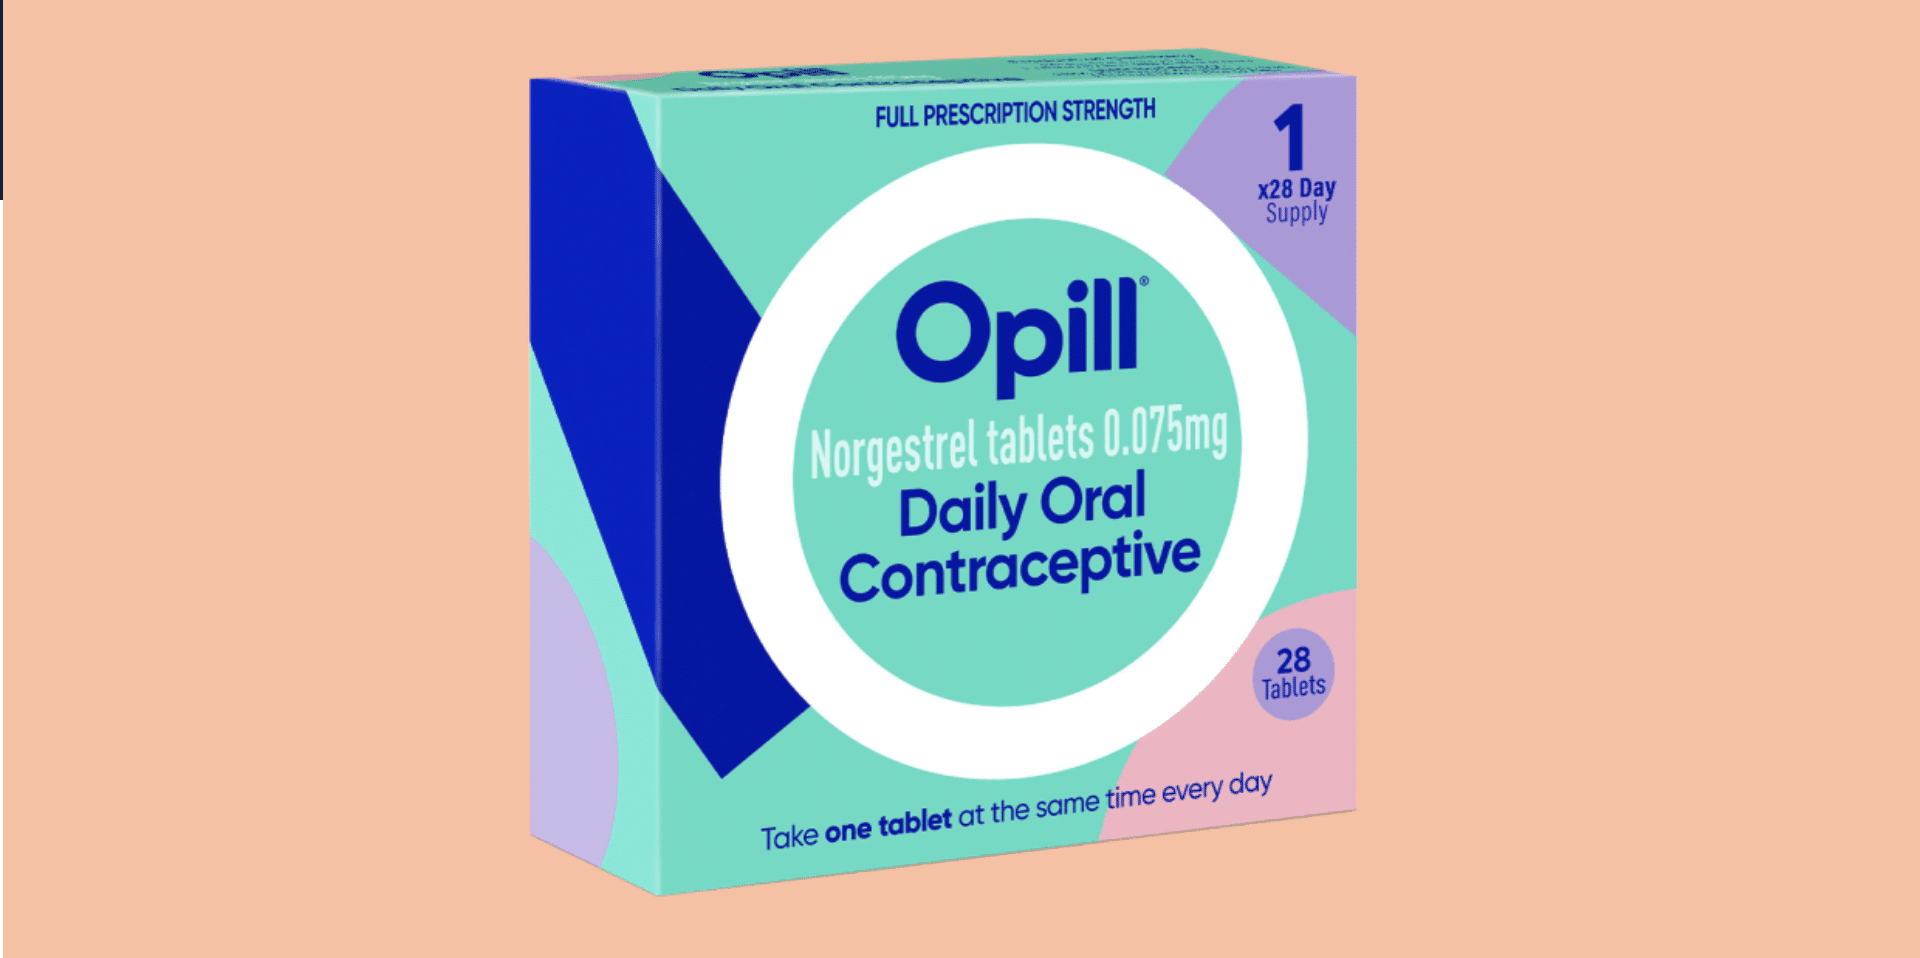 The FDA has just approved the first over-the-counter birth control pill in the U.S.